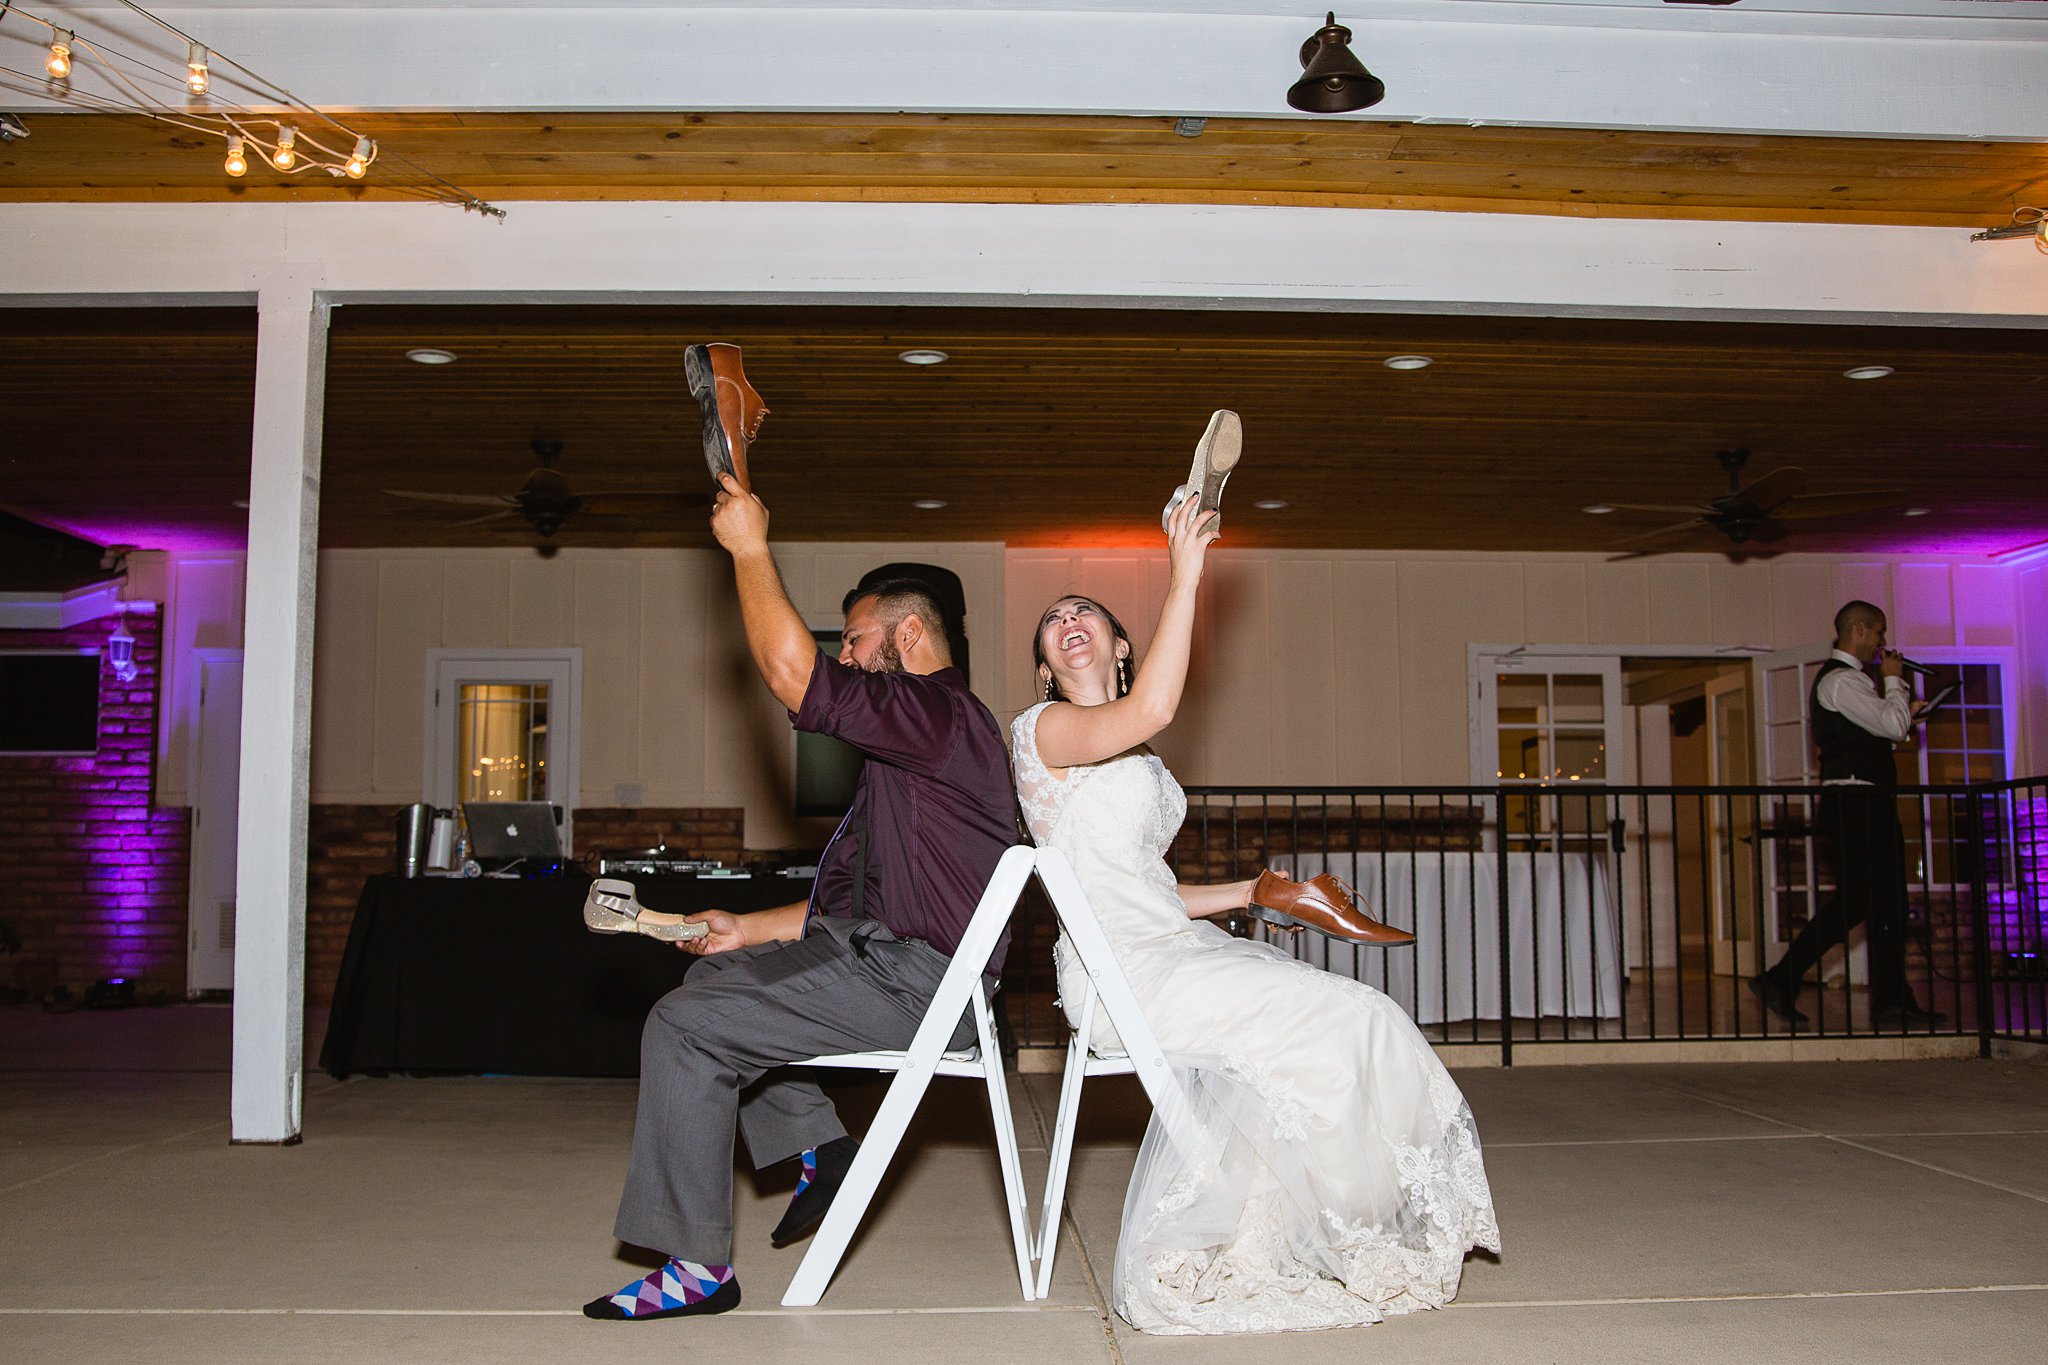 Bride and groom playing the newlywed shoe game by Phoenix wedding photographer PMA Photography.